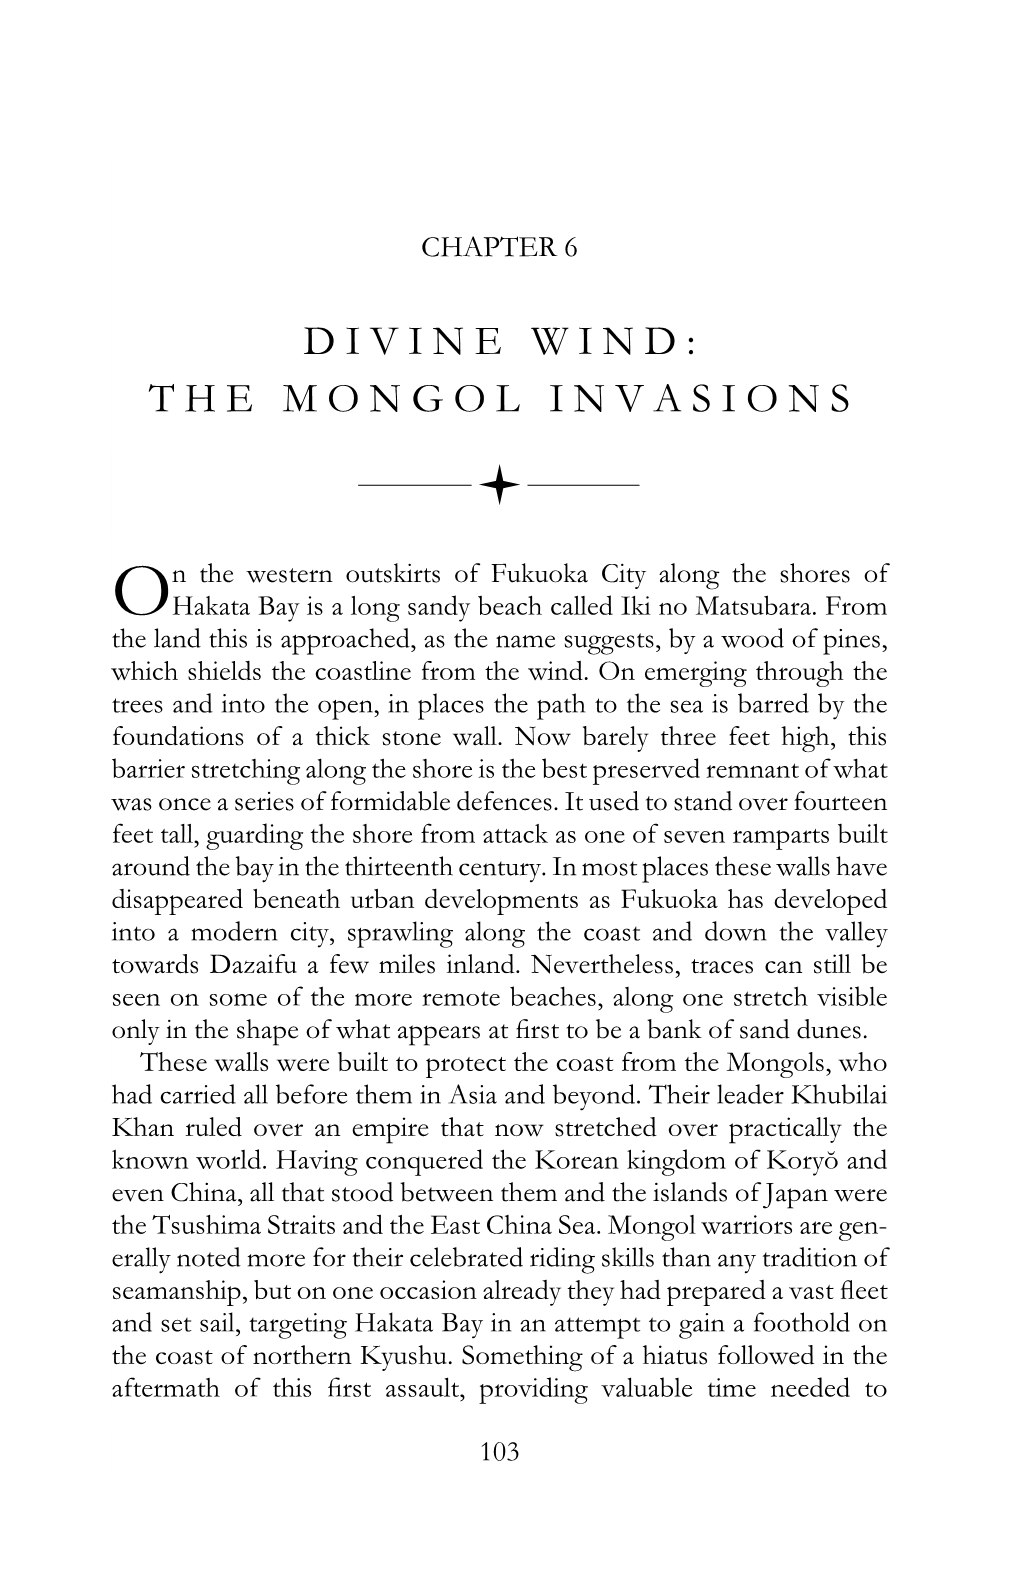 Divine Wind: the Mongol Invasions 